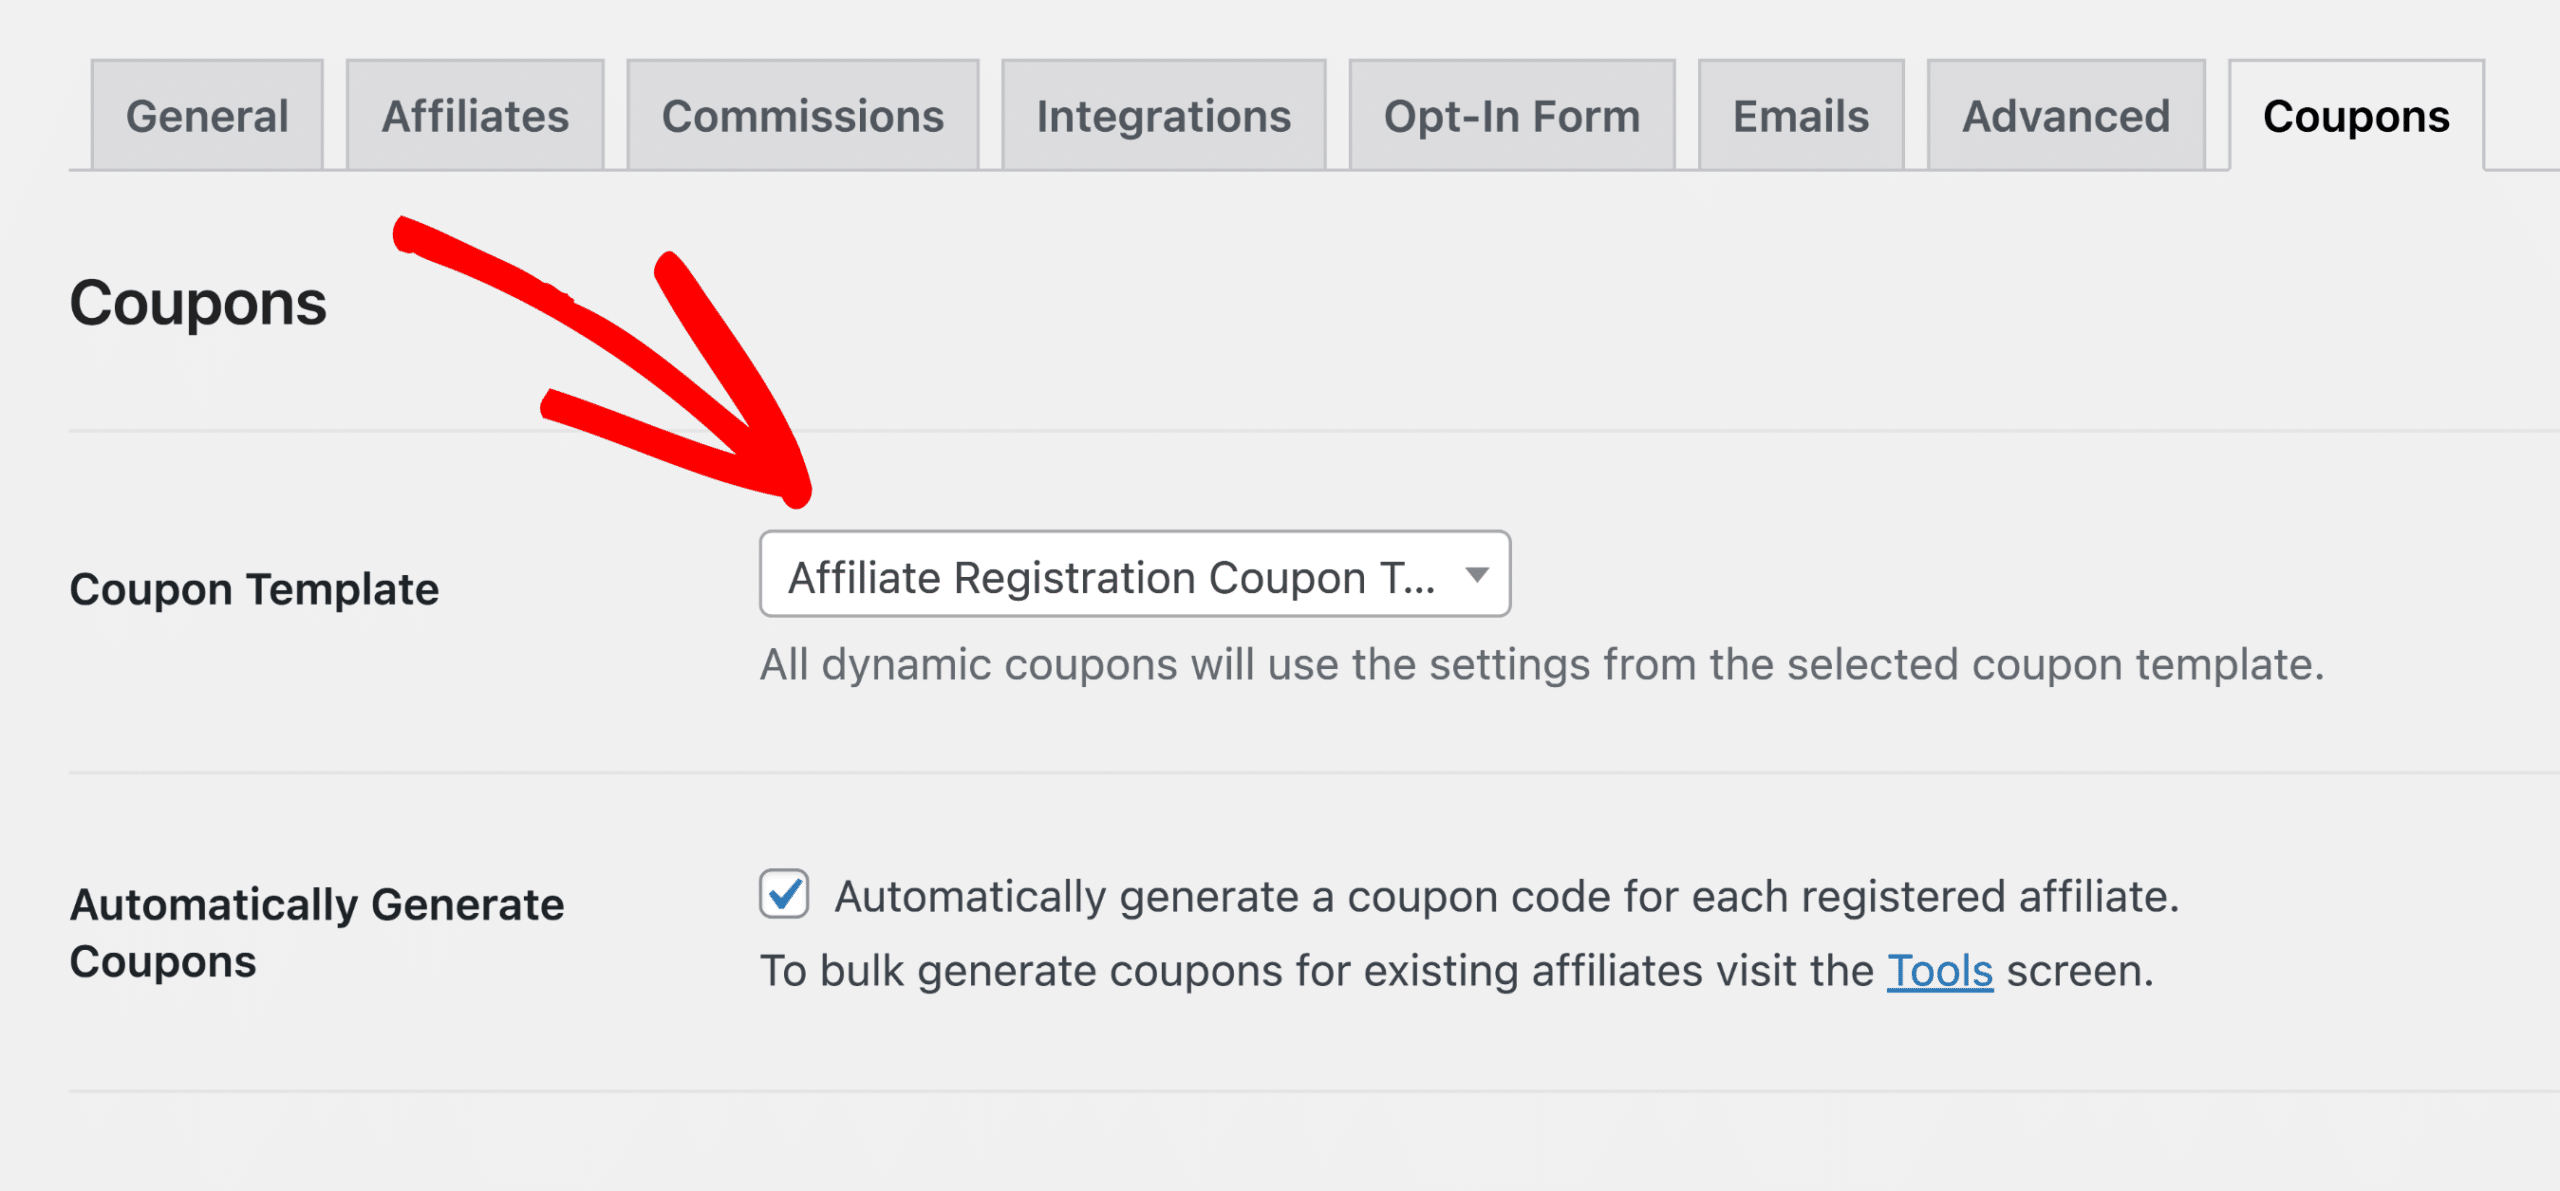 The Coupon Template setting within the Coupons tab